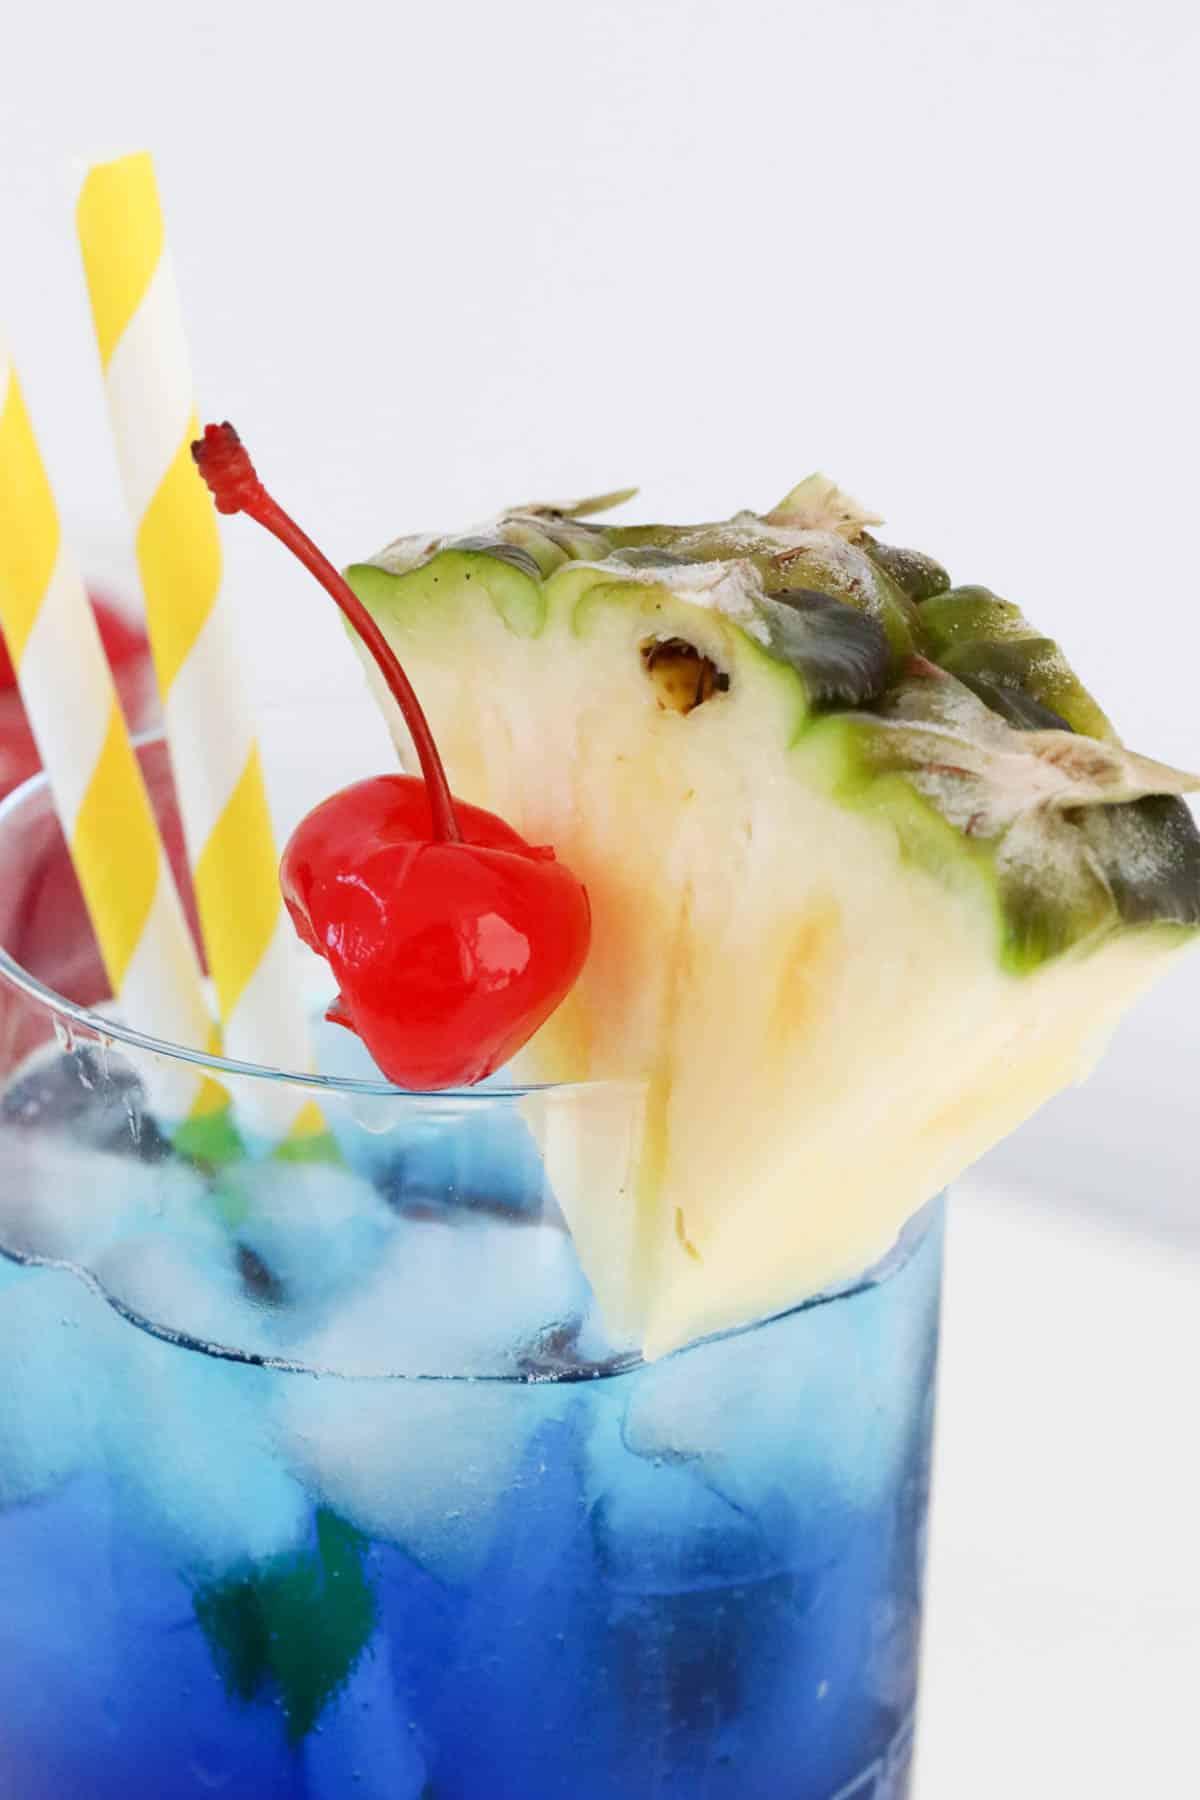 A close up shot of a cherry and pineapple in a glass with yellow straws.